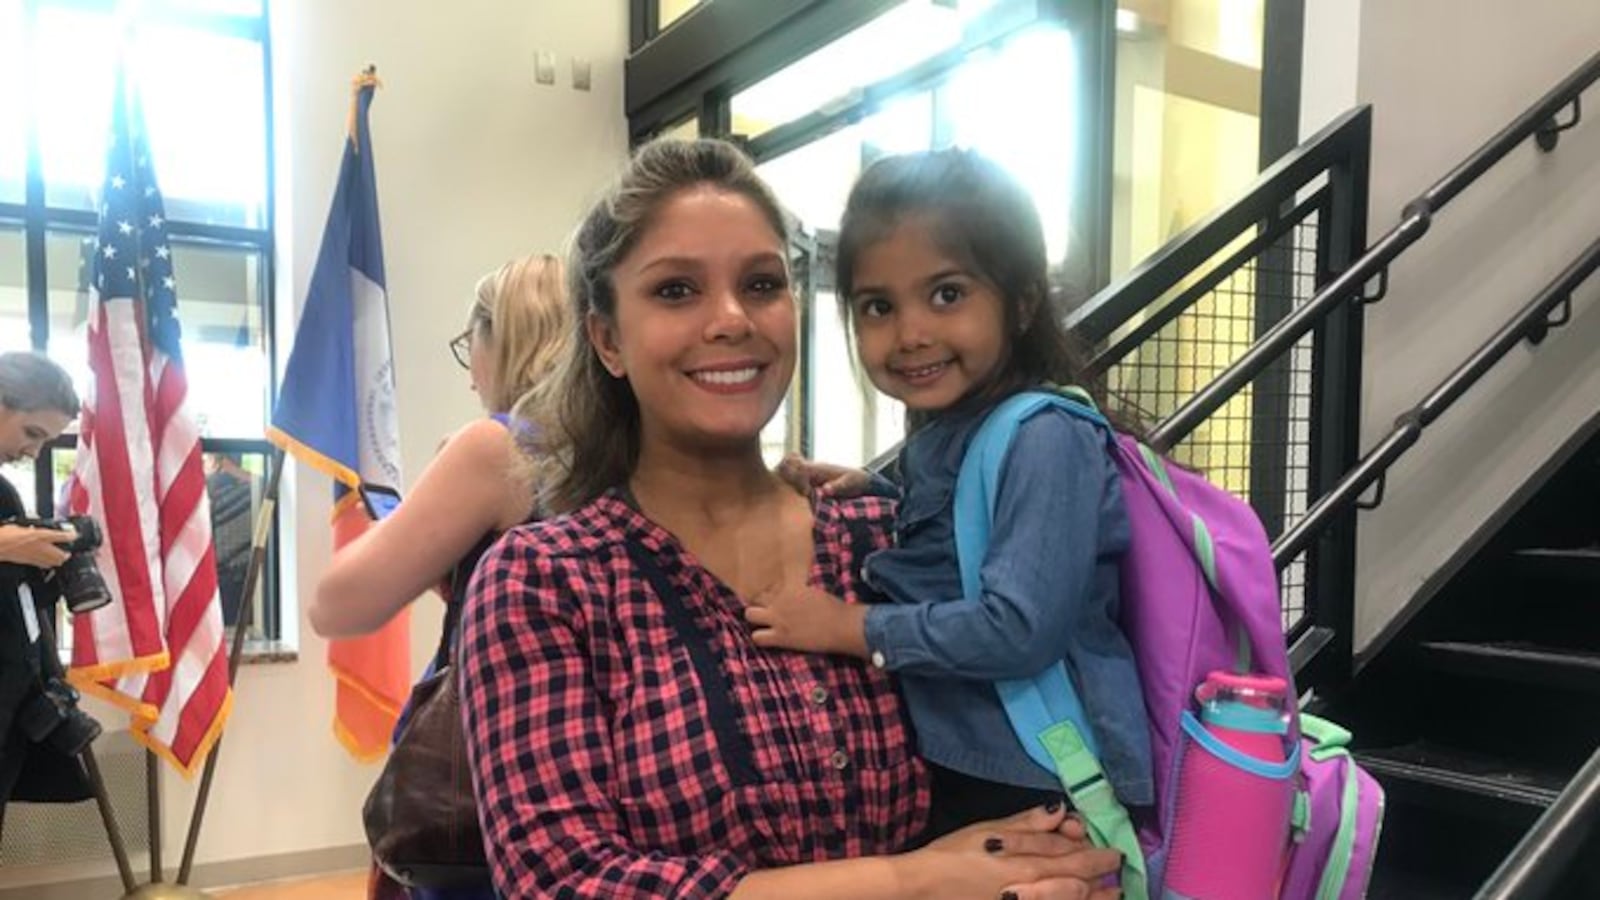 Thursday was 3-year-old Arya Chand’s first day of school ever. Here she is with her mom, Davina.